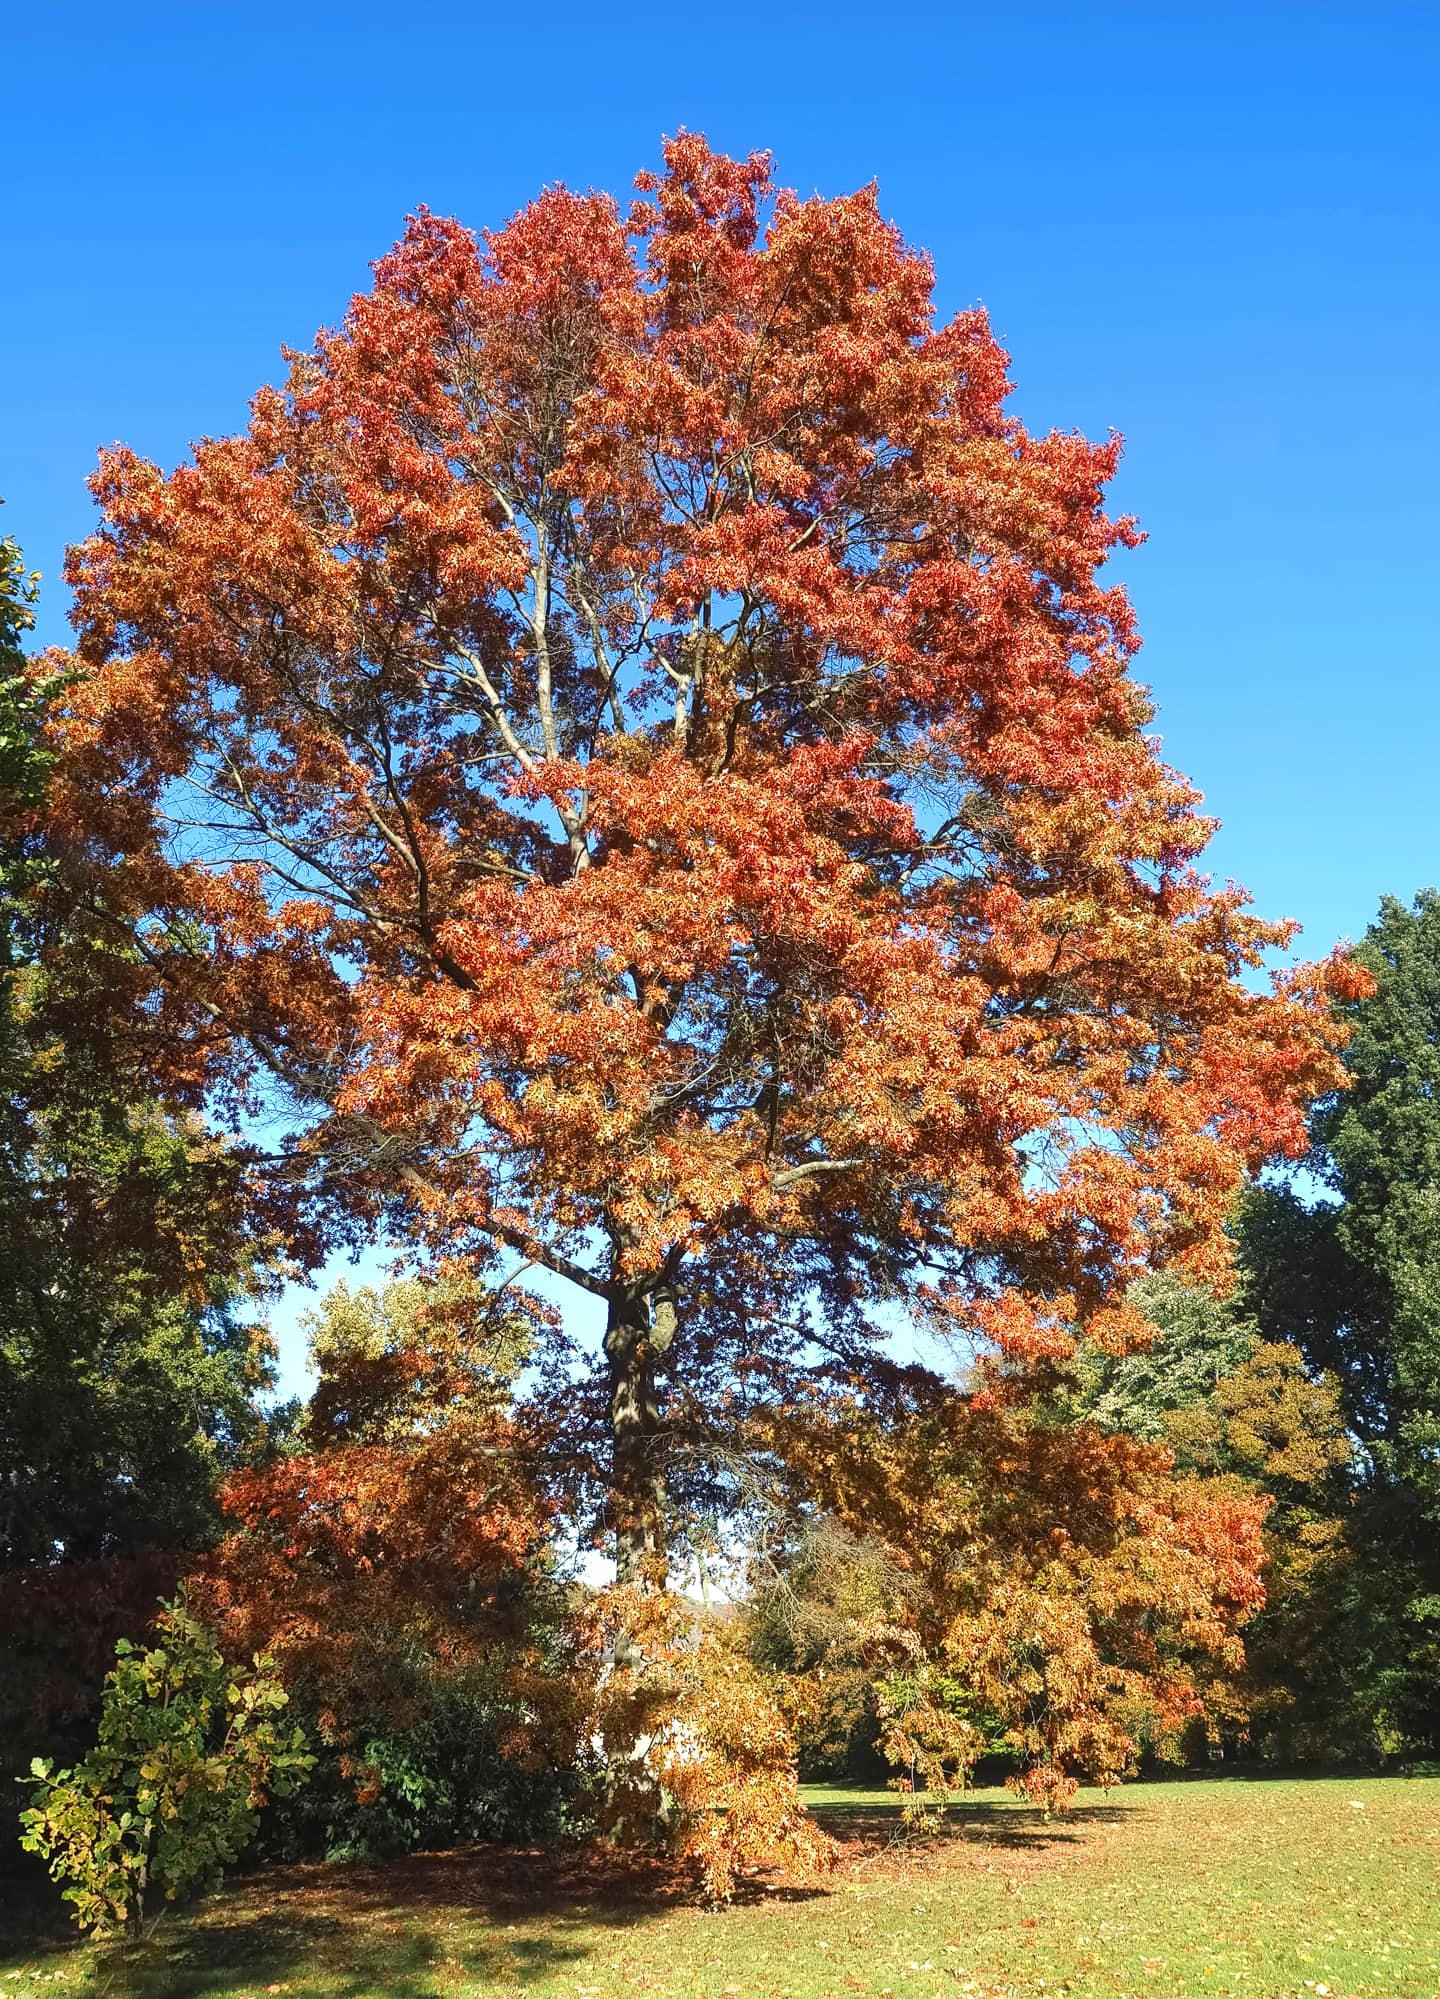 A scarlet oak tree with red leaves in fall.